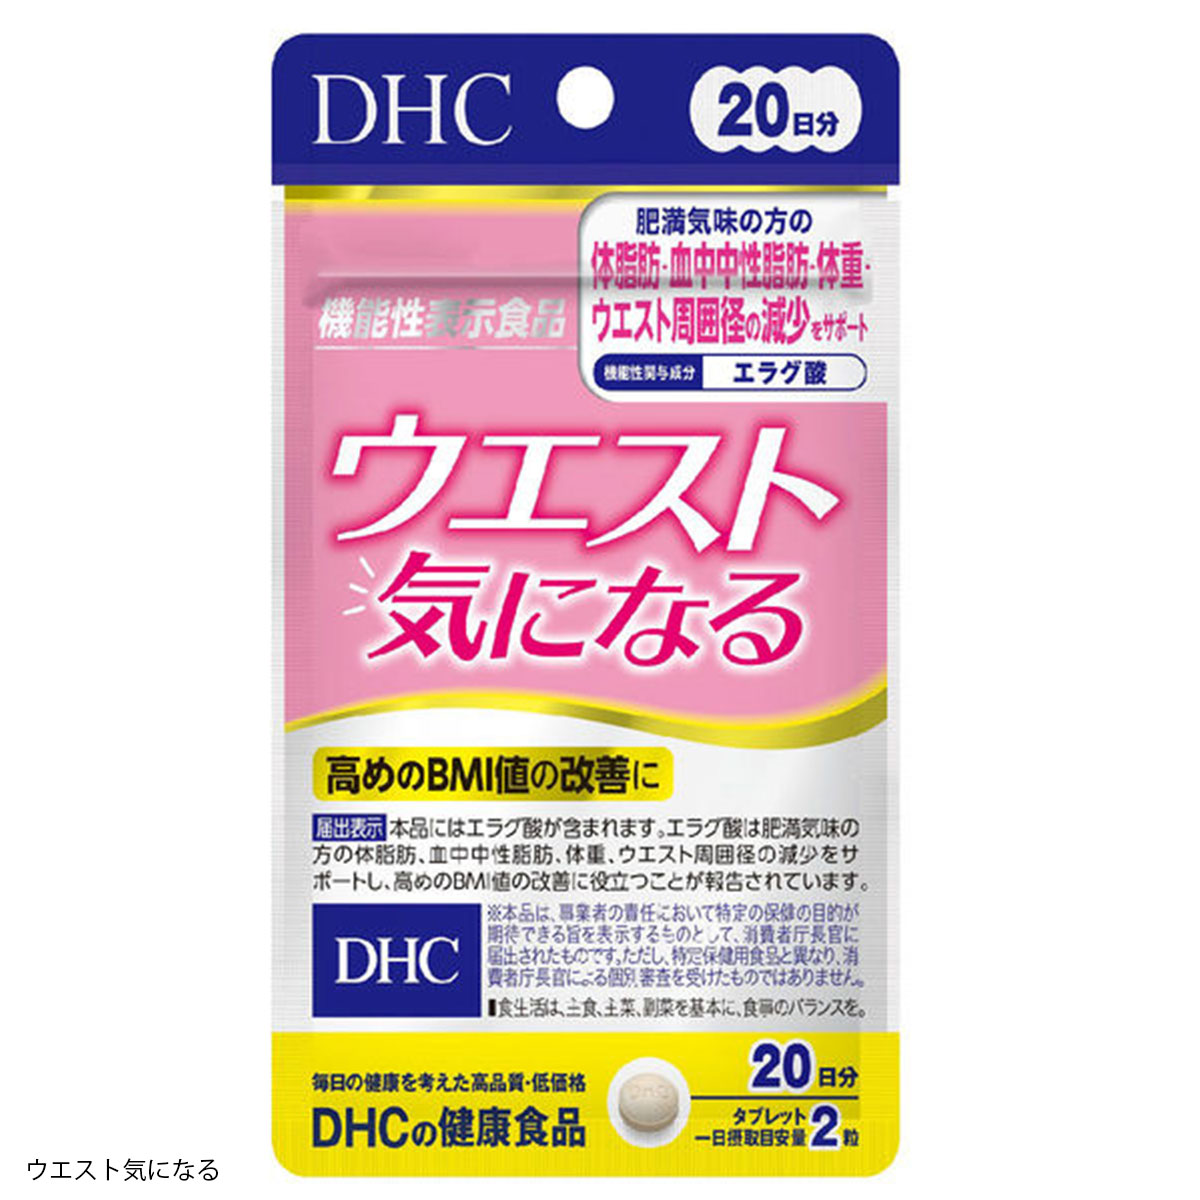 【DHC】ダイエットサプリ 20日分